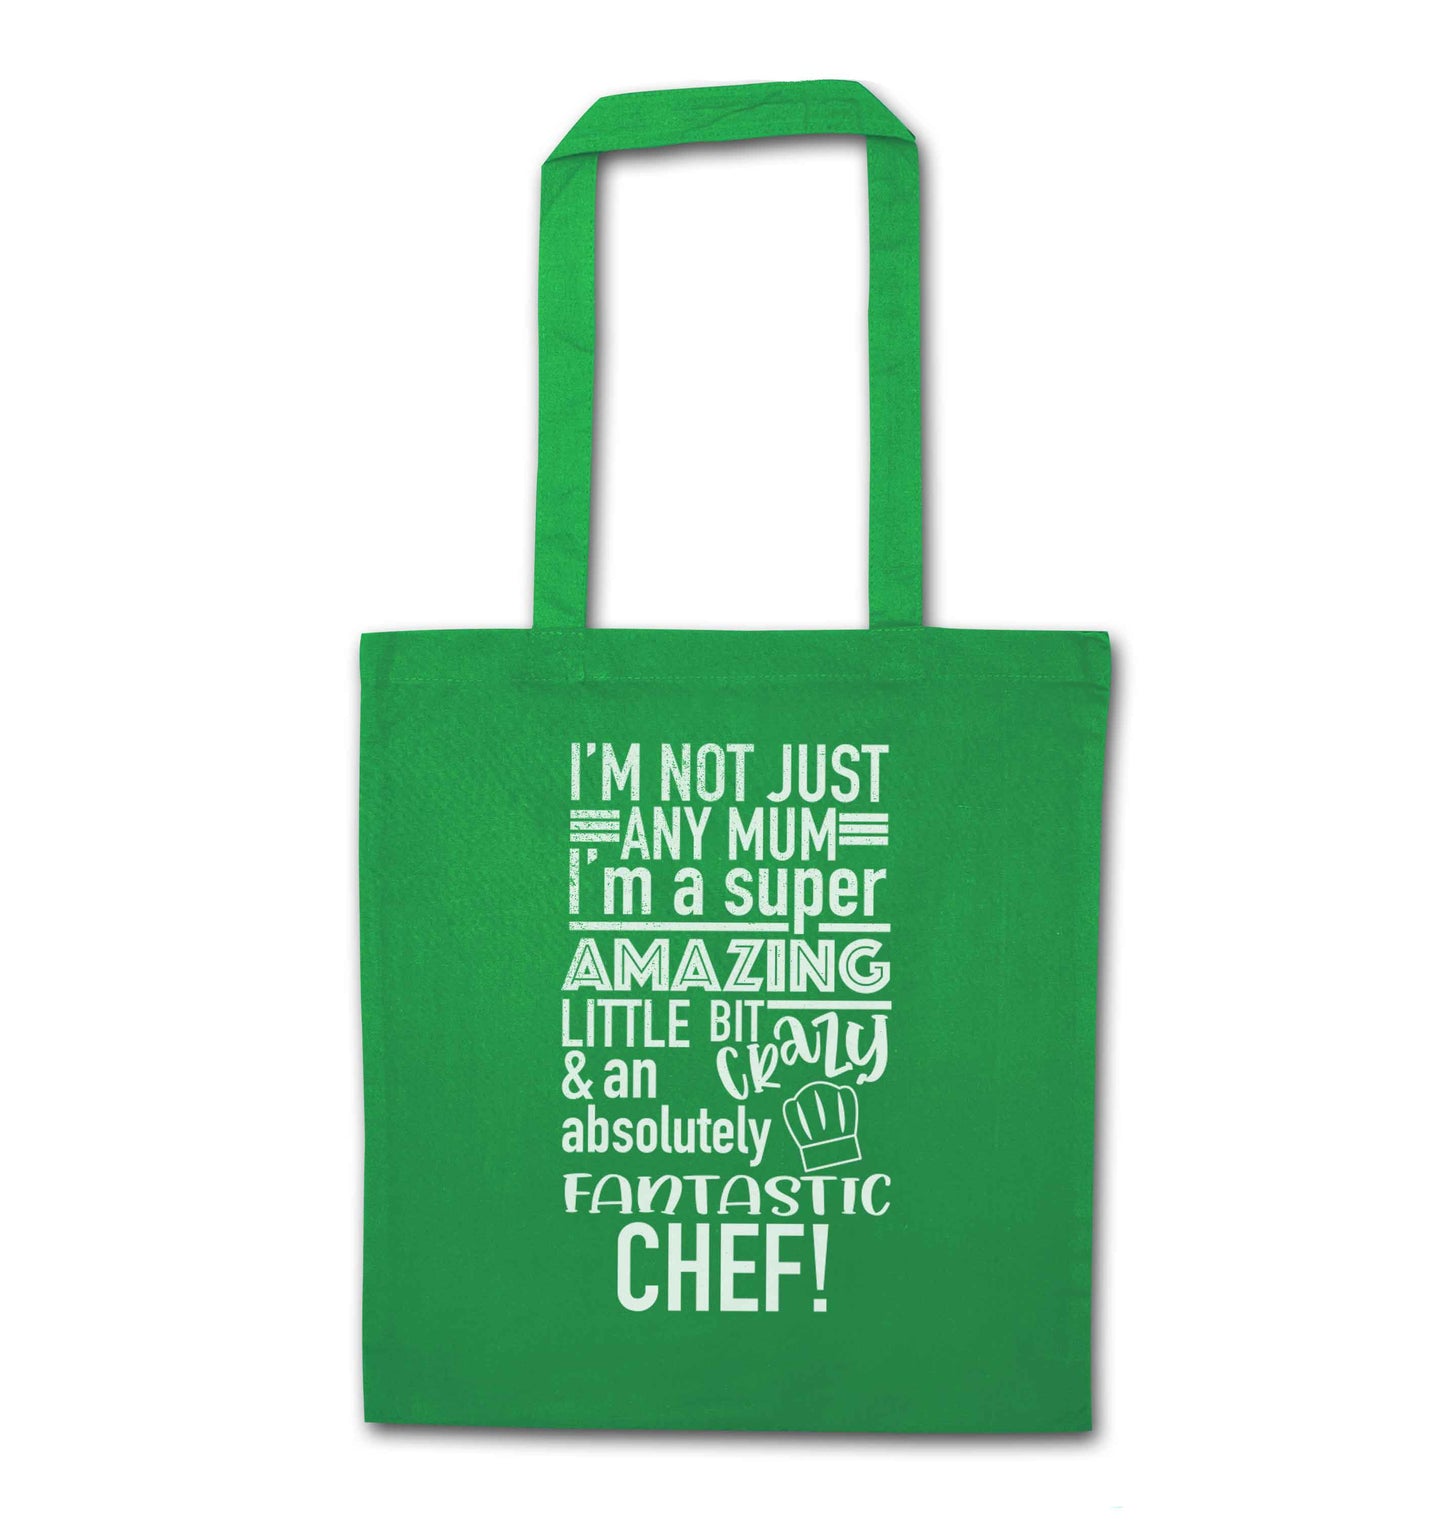 I'm not just any mum I'm a super amazing little bit crazy and an absolutely fantastic chef! green tote bag